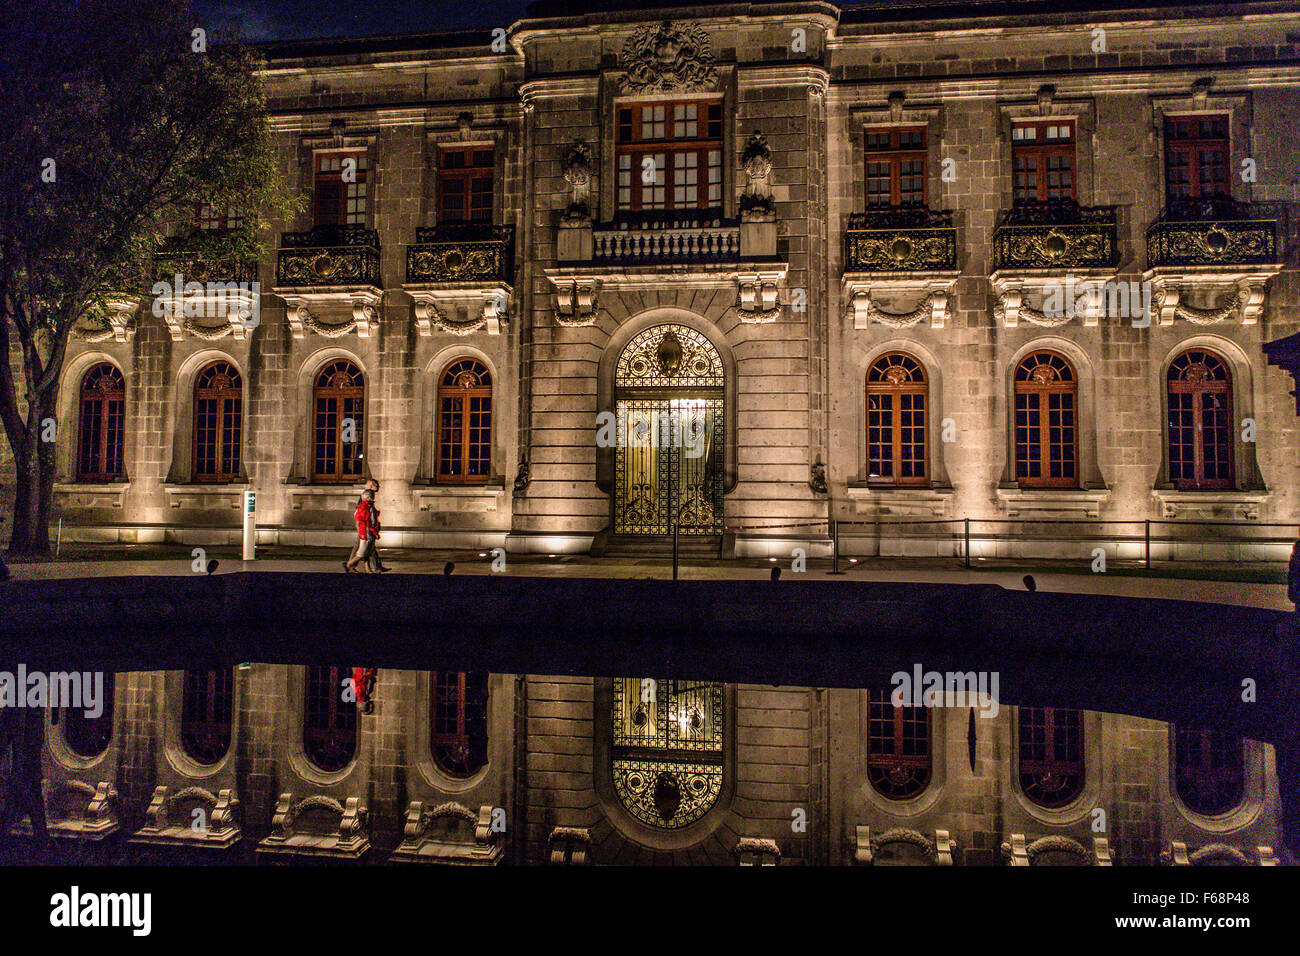 Chapultepec Castle, Chapultepec Park, Mexico City. The Castle is relflected in the water. Stock Photo